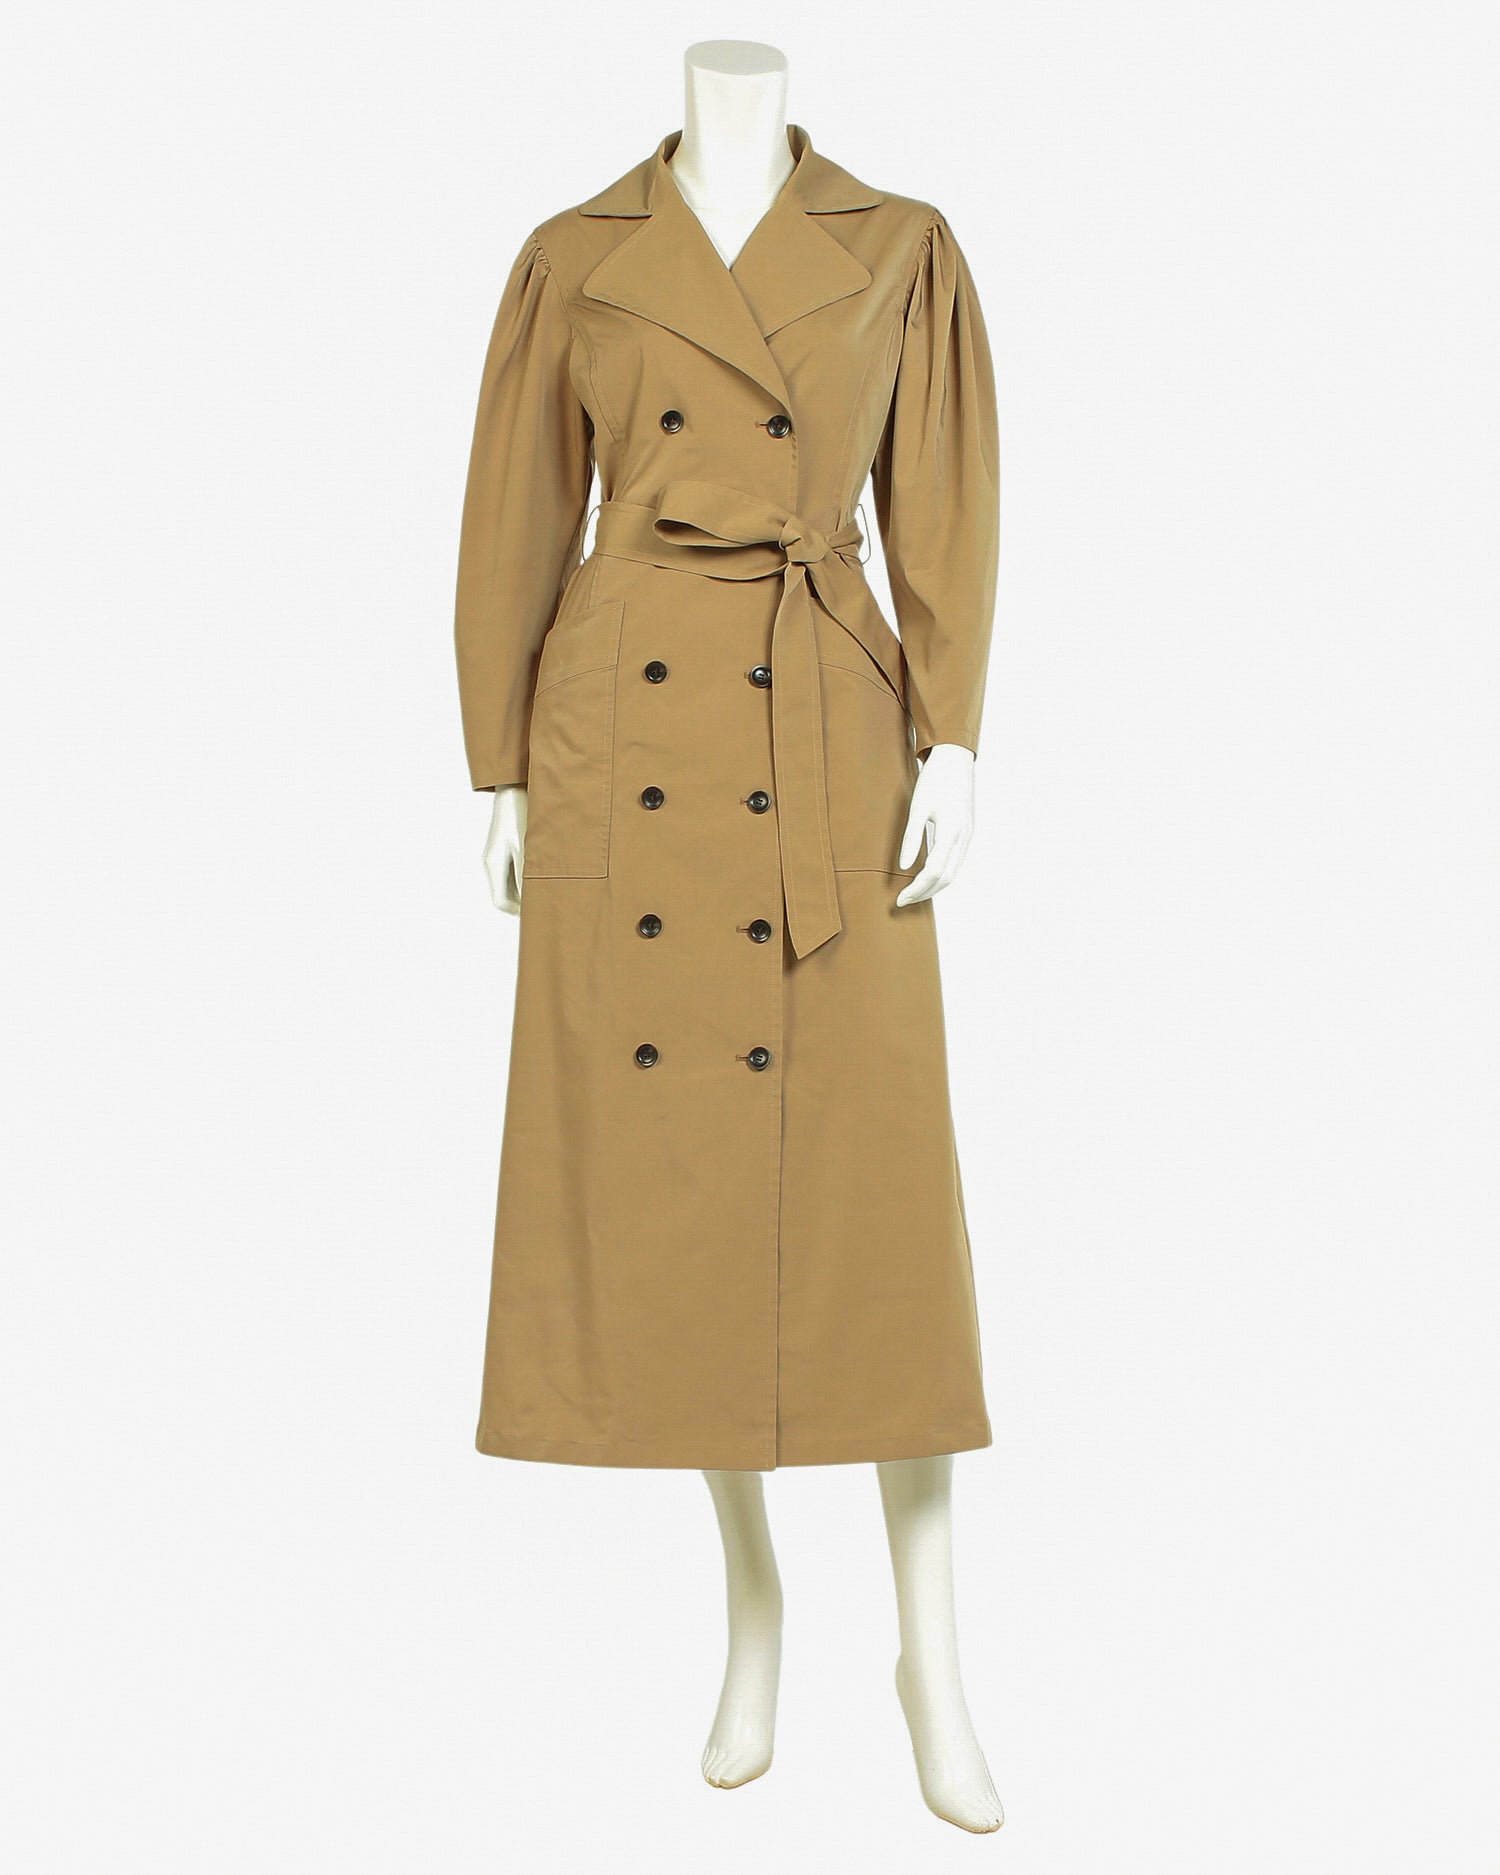 [Made-to-Order] Trench-like dress